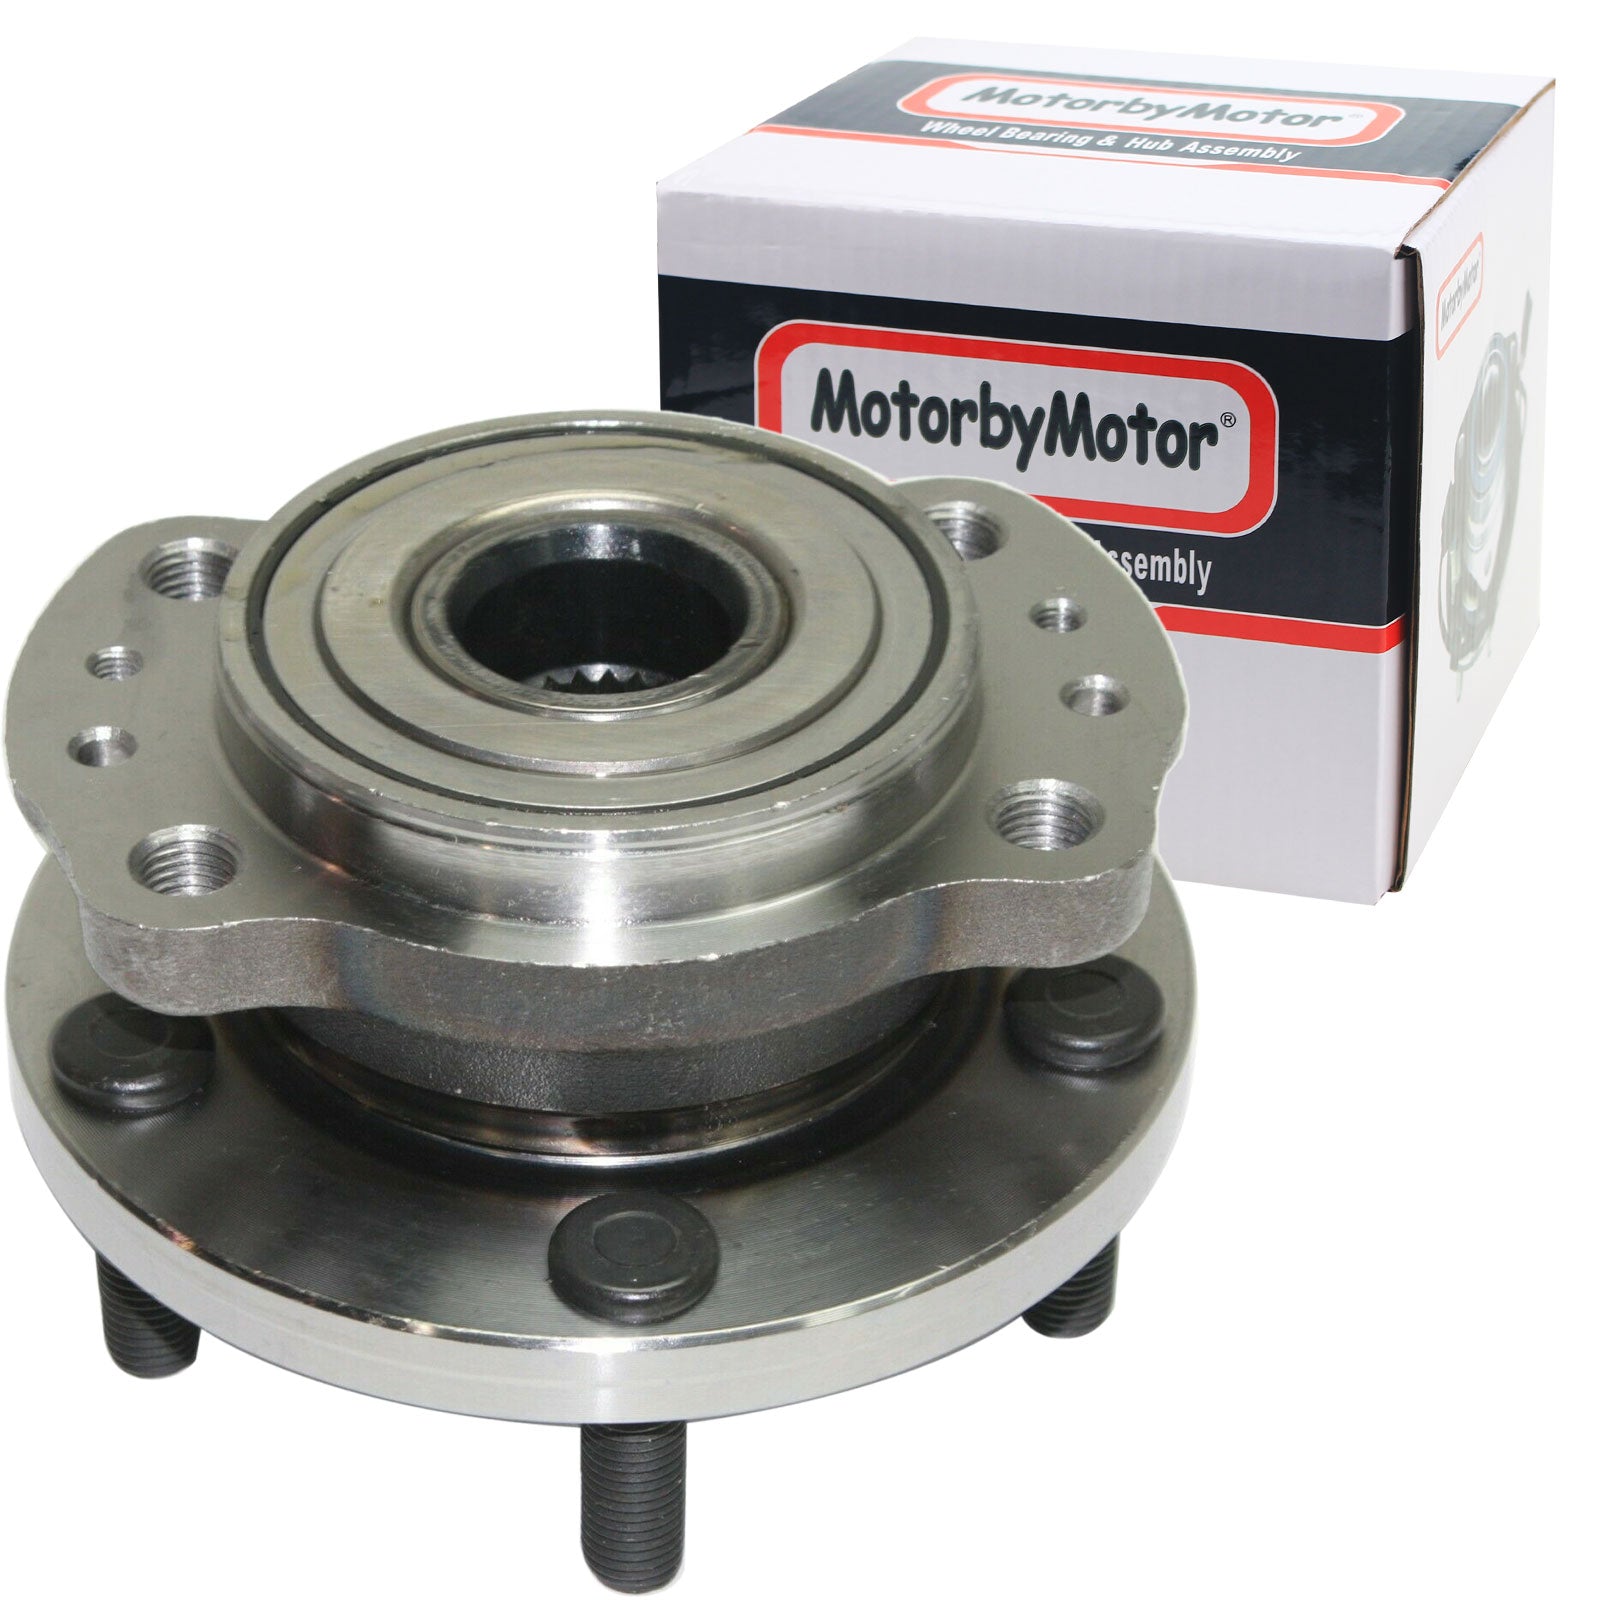 MotorbyMotor 512157 Rear Wheel Bearing Hub Assembly with 5 Lugs, Chrysler Town & Country, Dodge Grand Caravan Low-Runout OE Directly Replacement MotorbyMotor